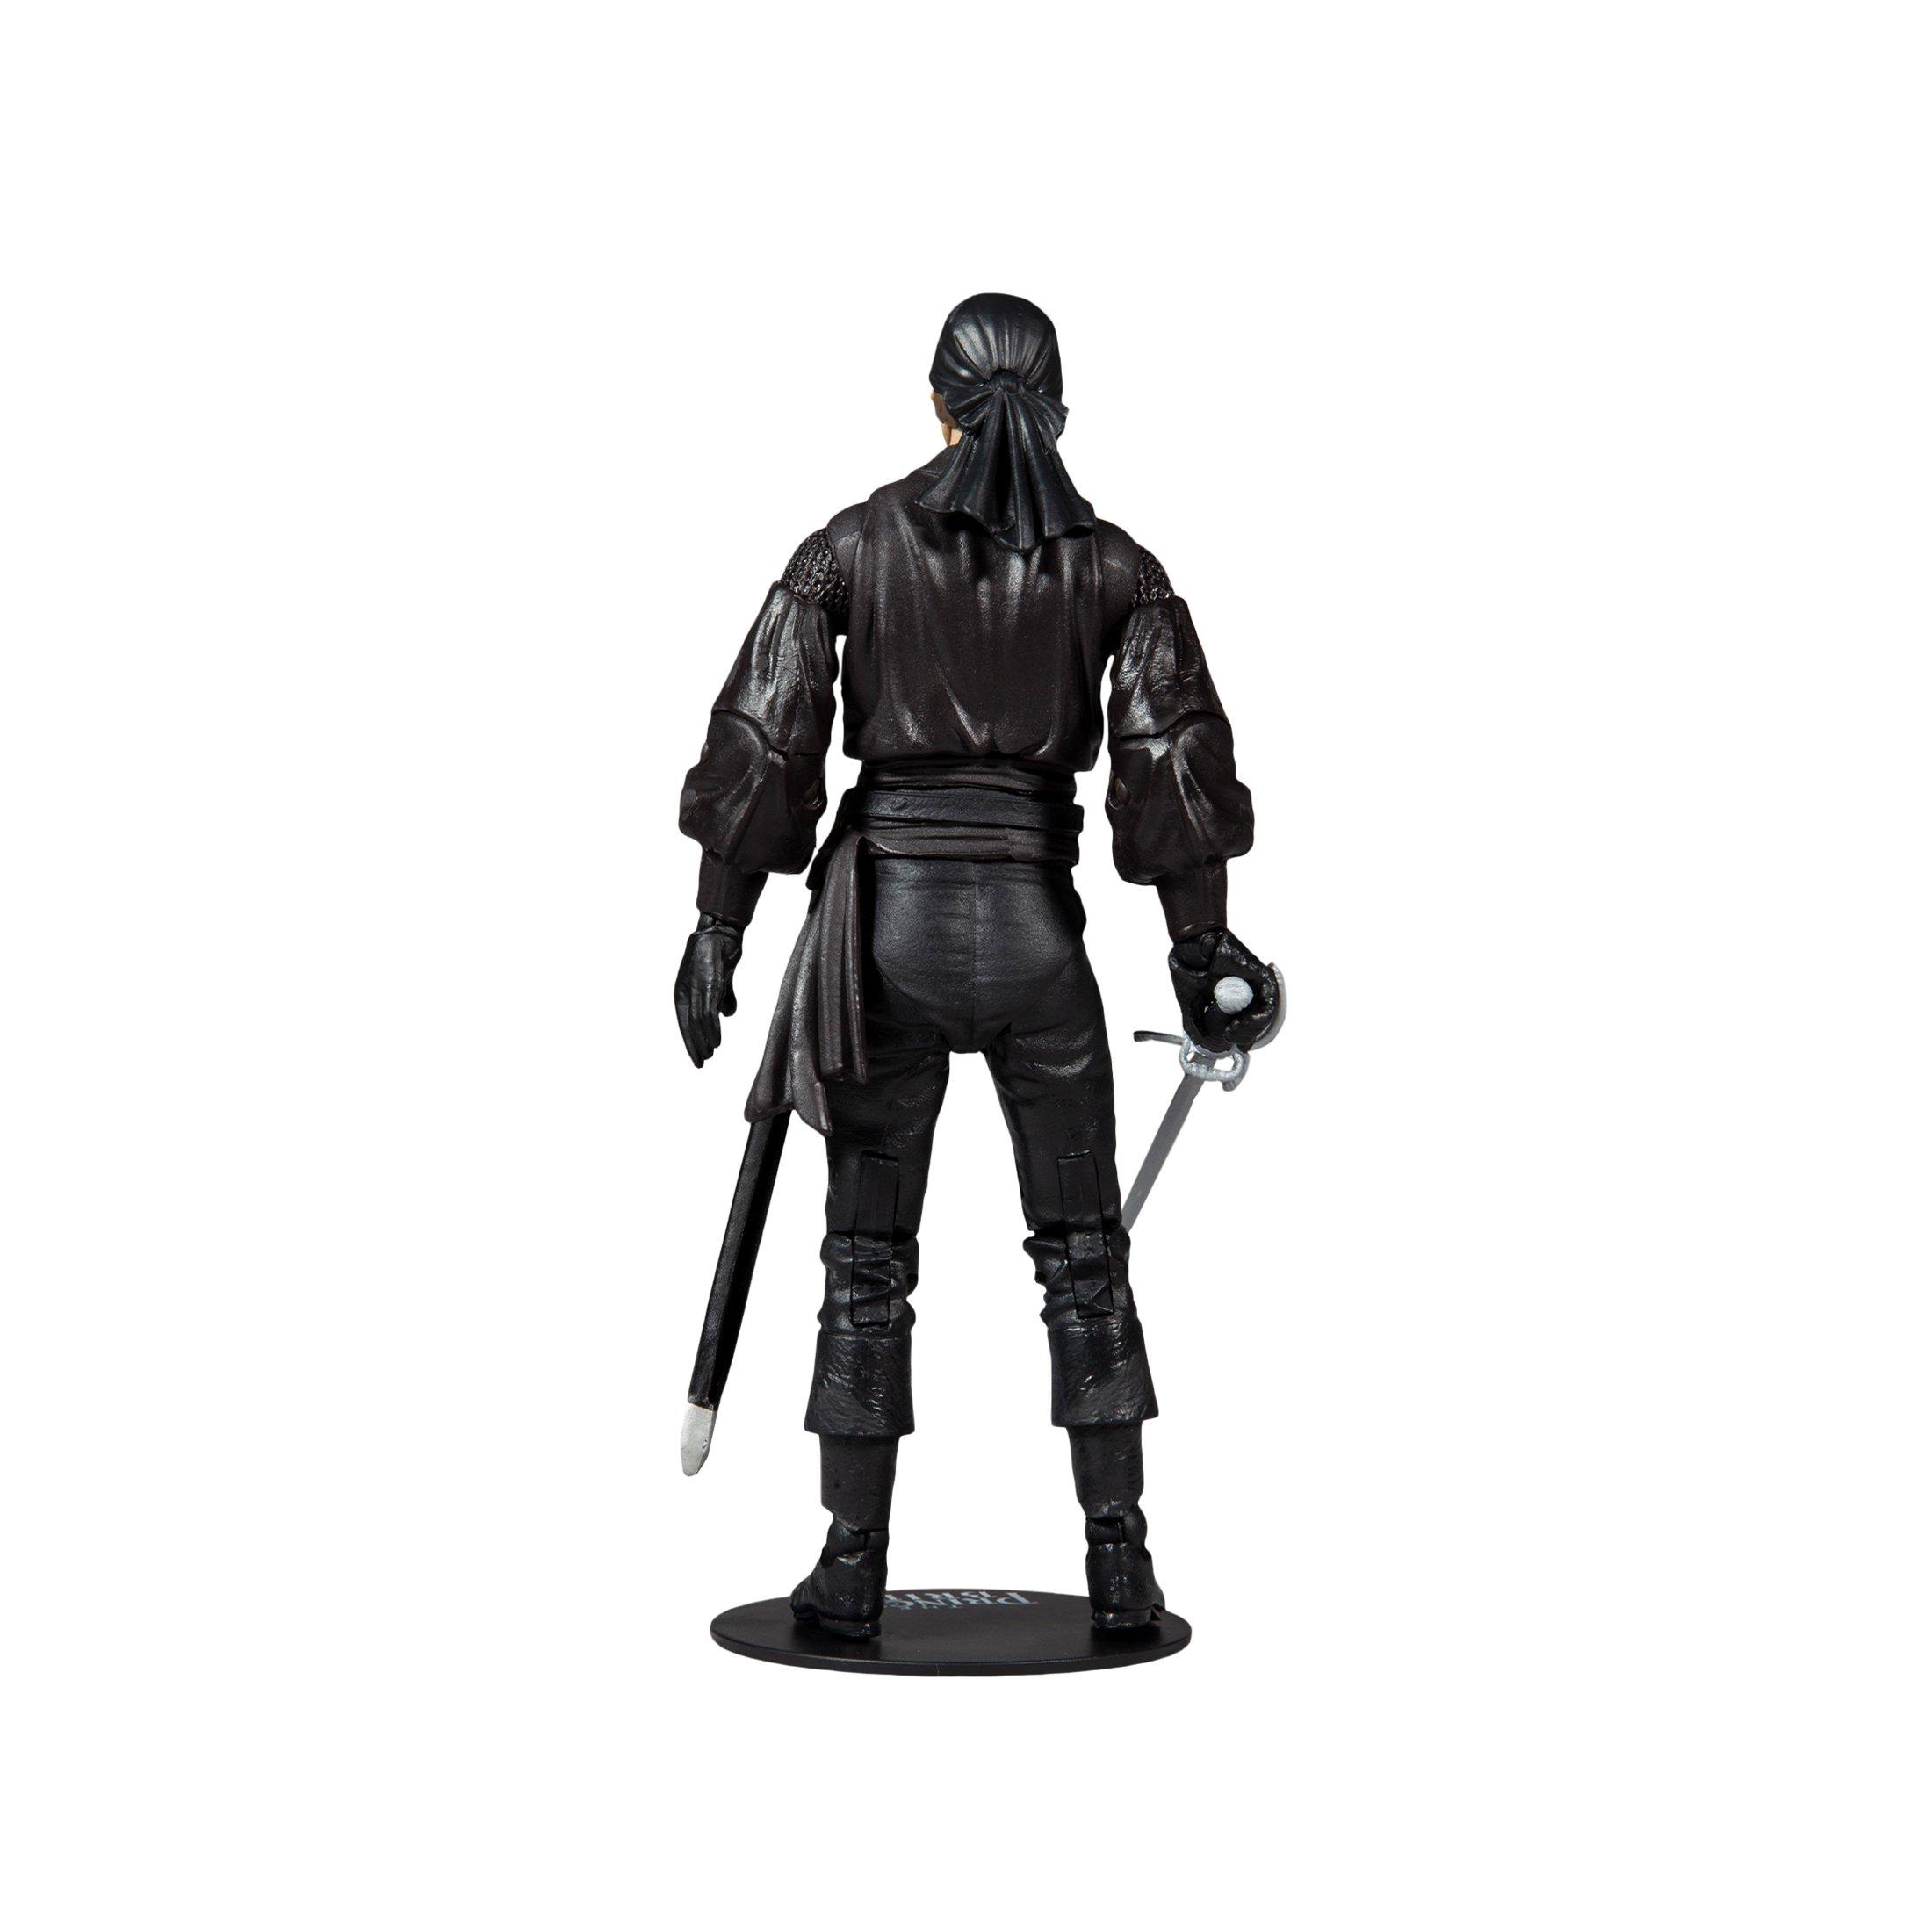 Mcfarlane Toys The Princess Bride Westley Dread Pirate Roberts 7 In Action Figure 